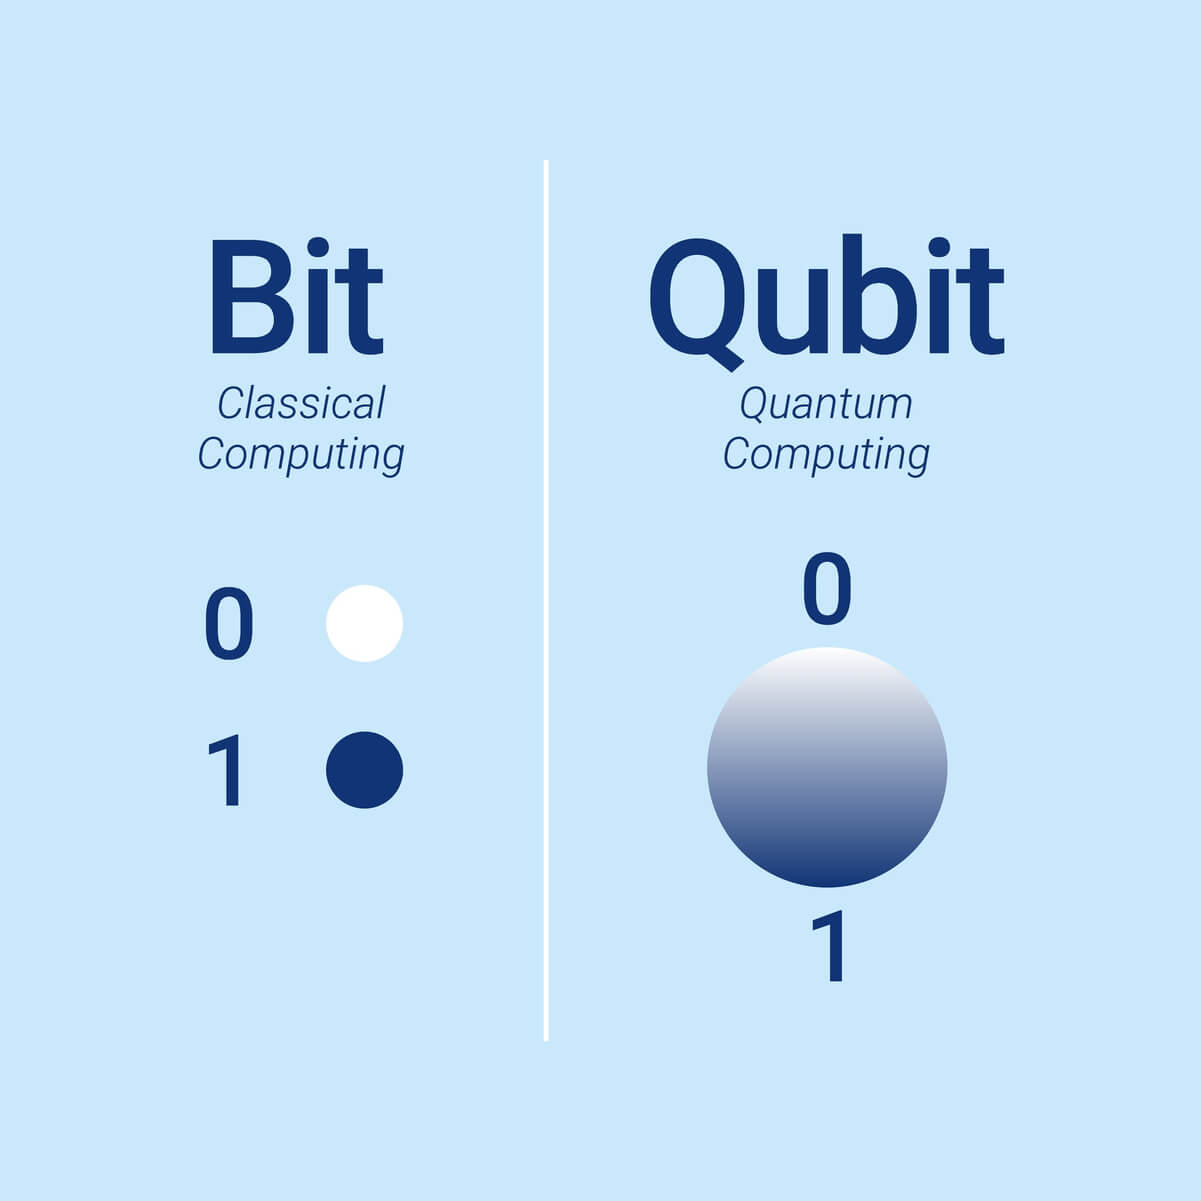 A visual comparison of the difference between bits, used in ordinary, household computers, compared to the qubits used in quantum computers.